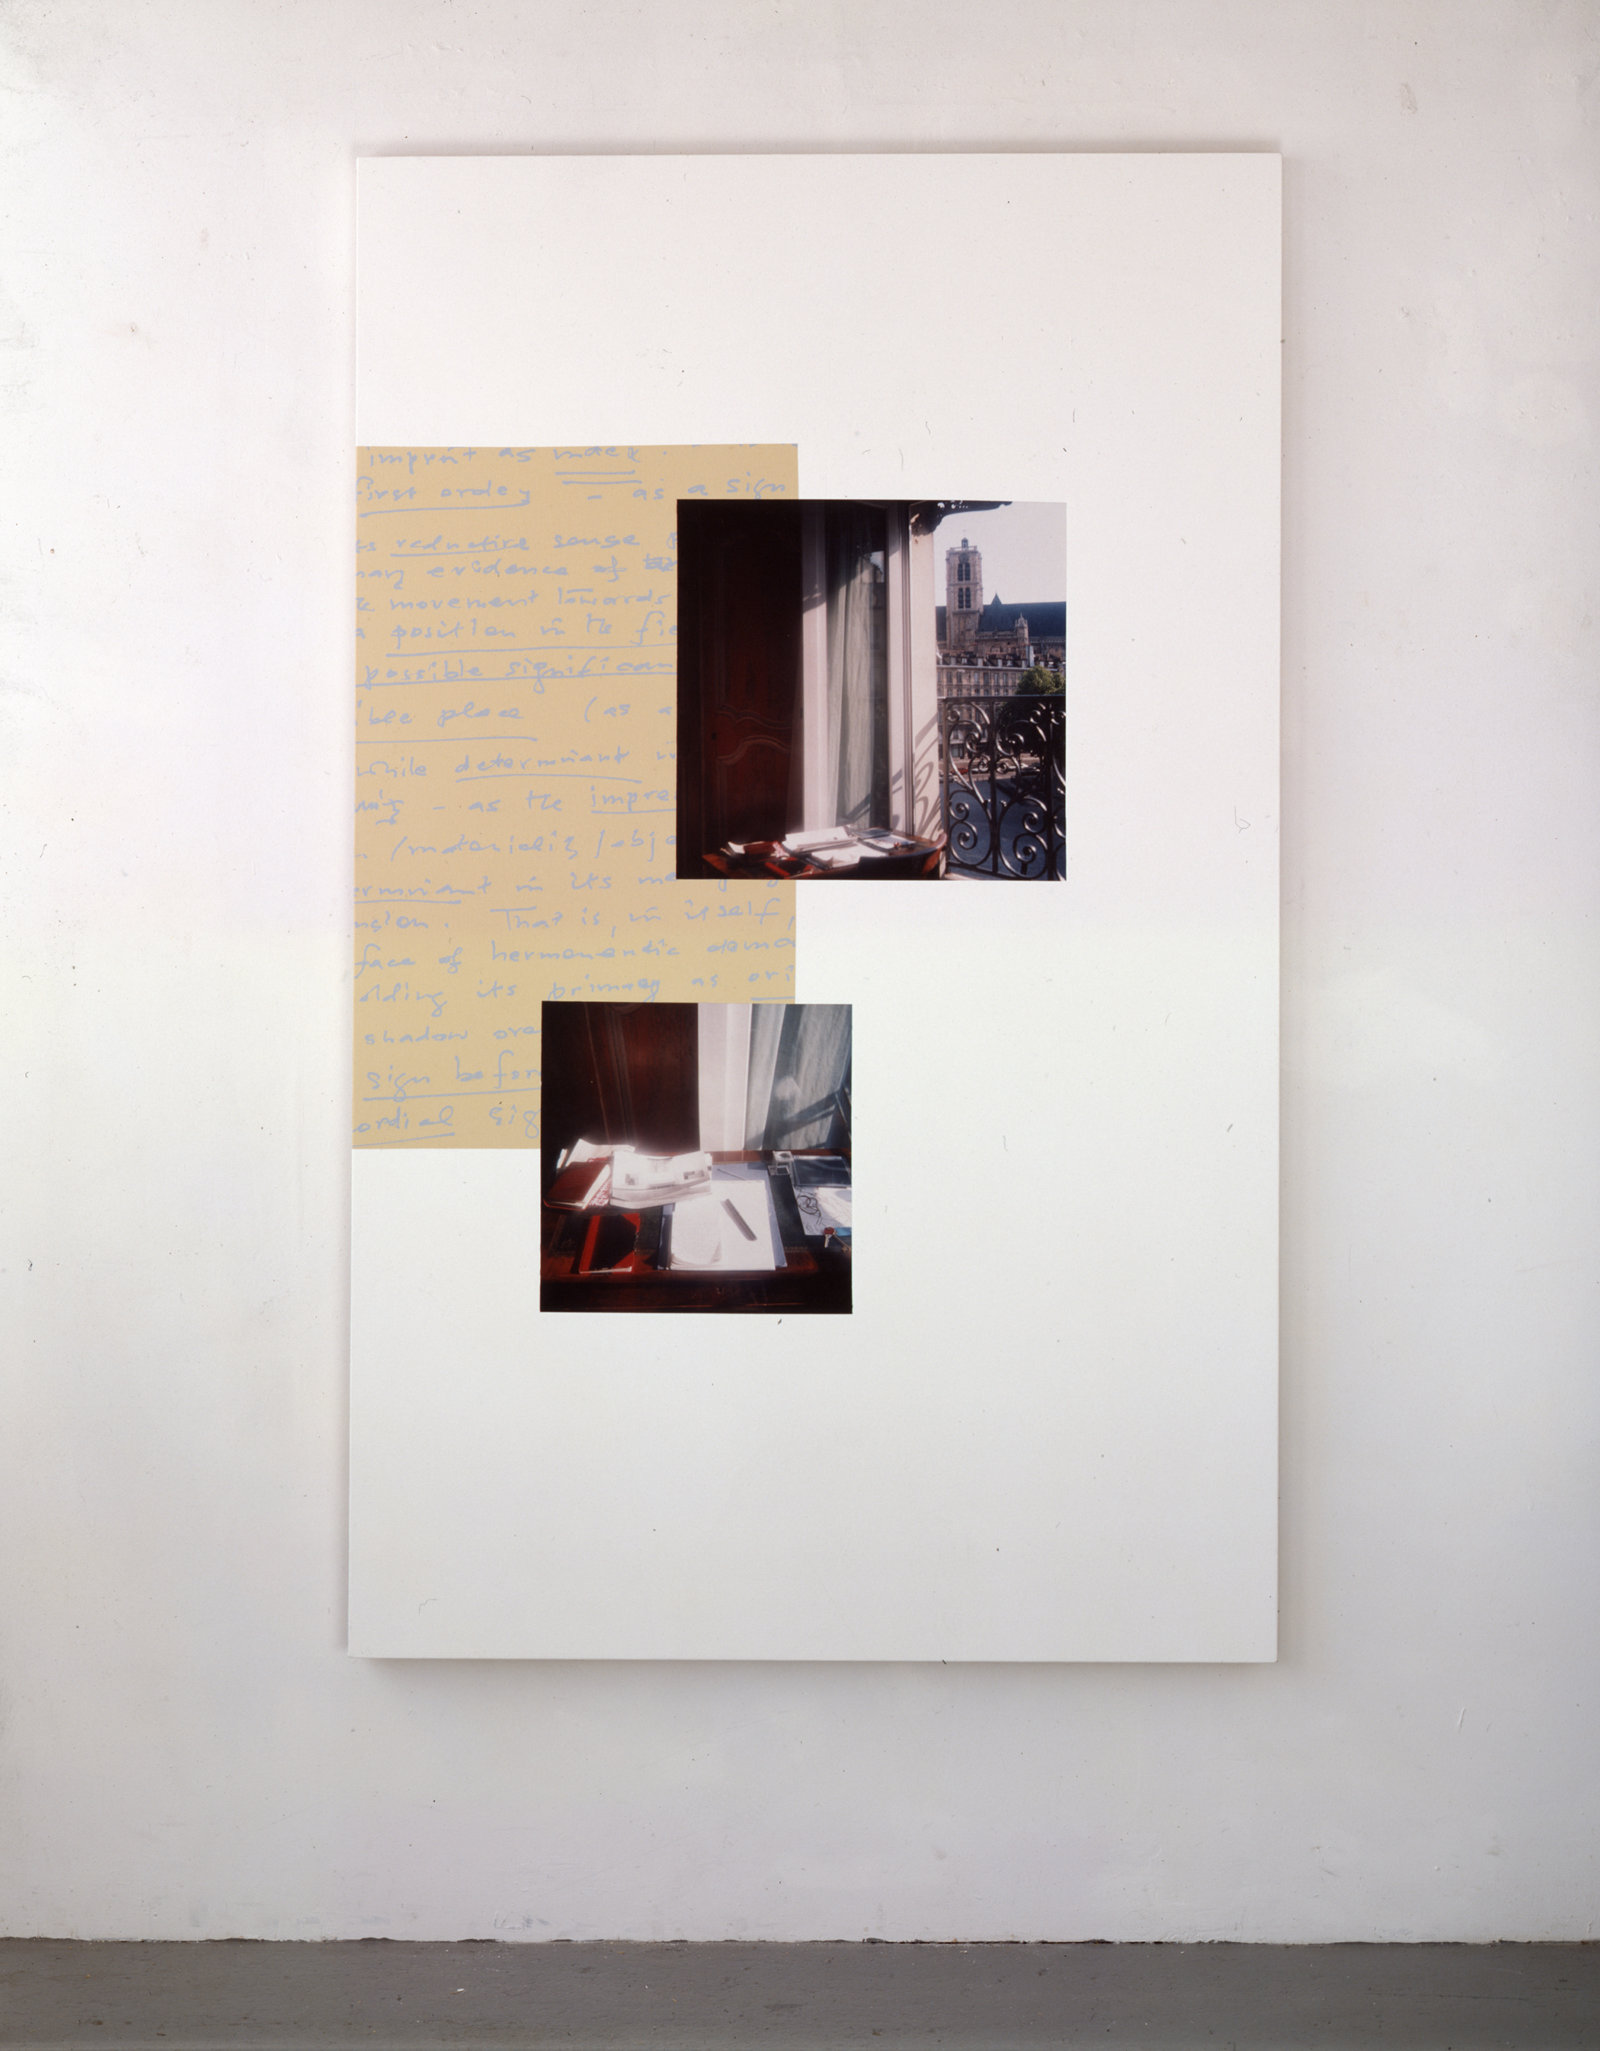 Ian Wallace, Notes on the Imprint, 1996, acrylic and photolaminate on canvas, 78 x 48 in. (198 x 122 cm)